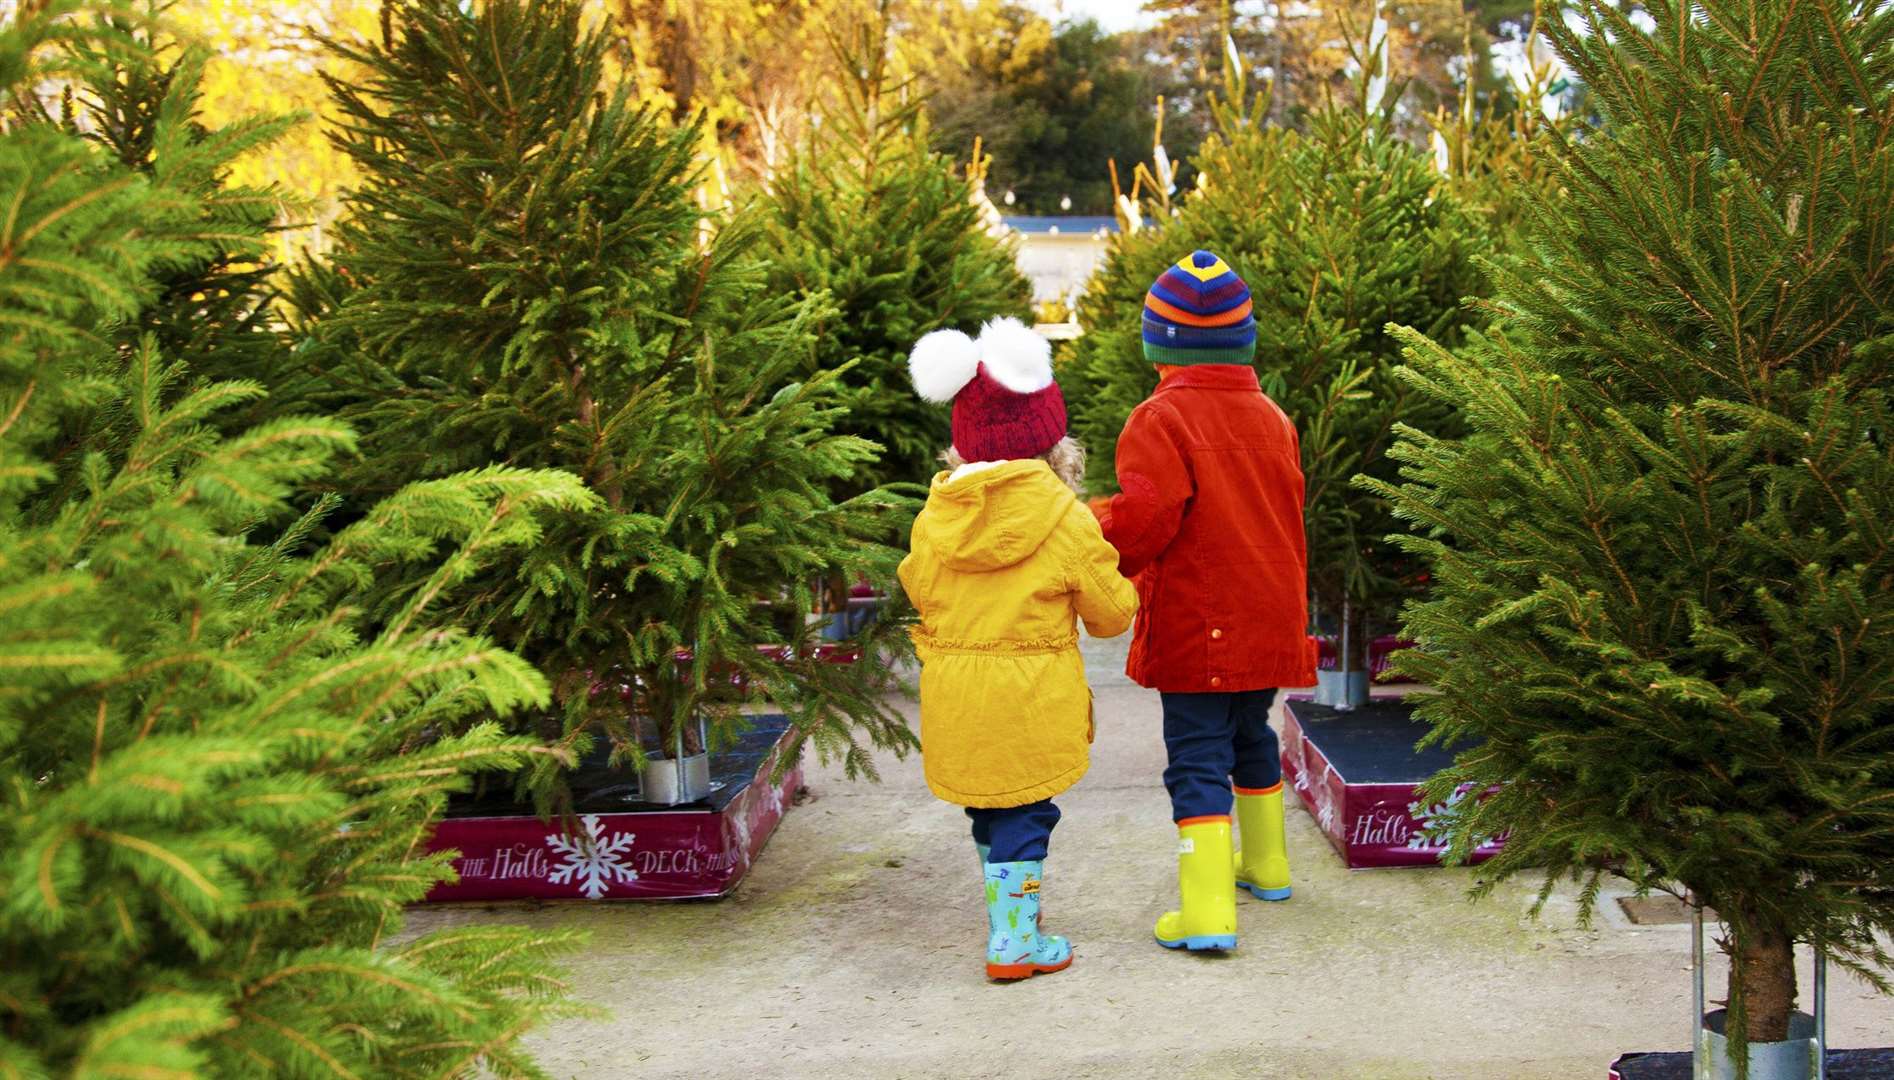 This Saturday and Sunday is predicted to be a popular time for finding a real Christmas tree